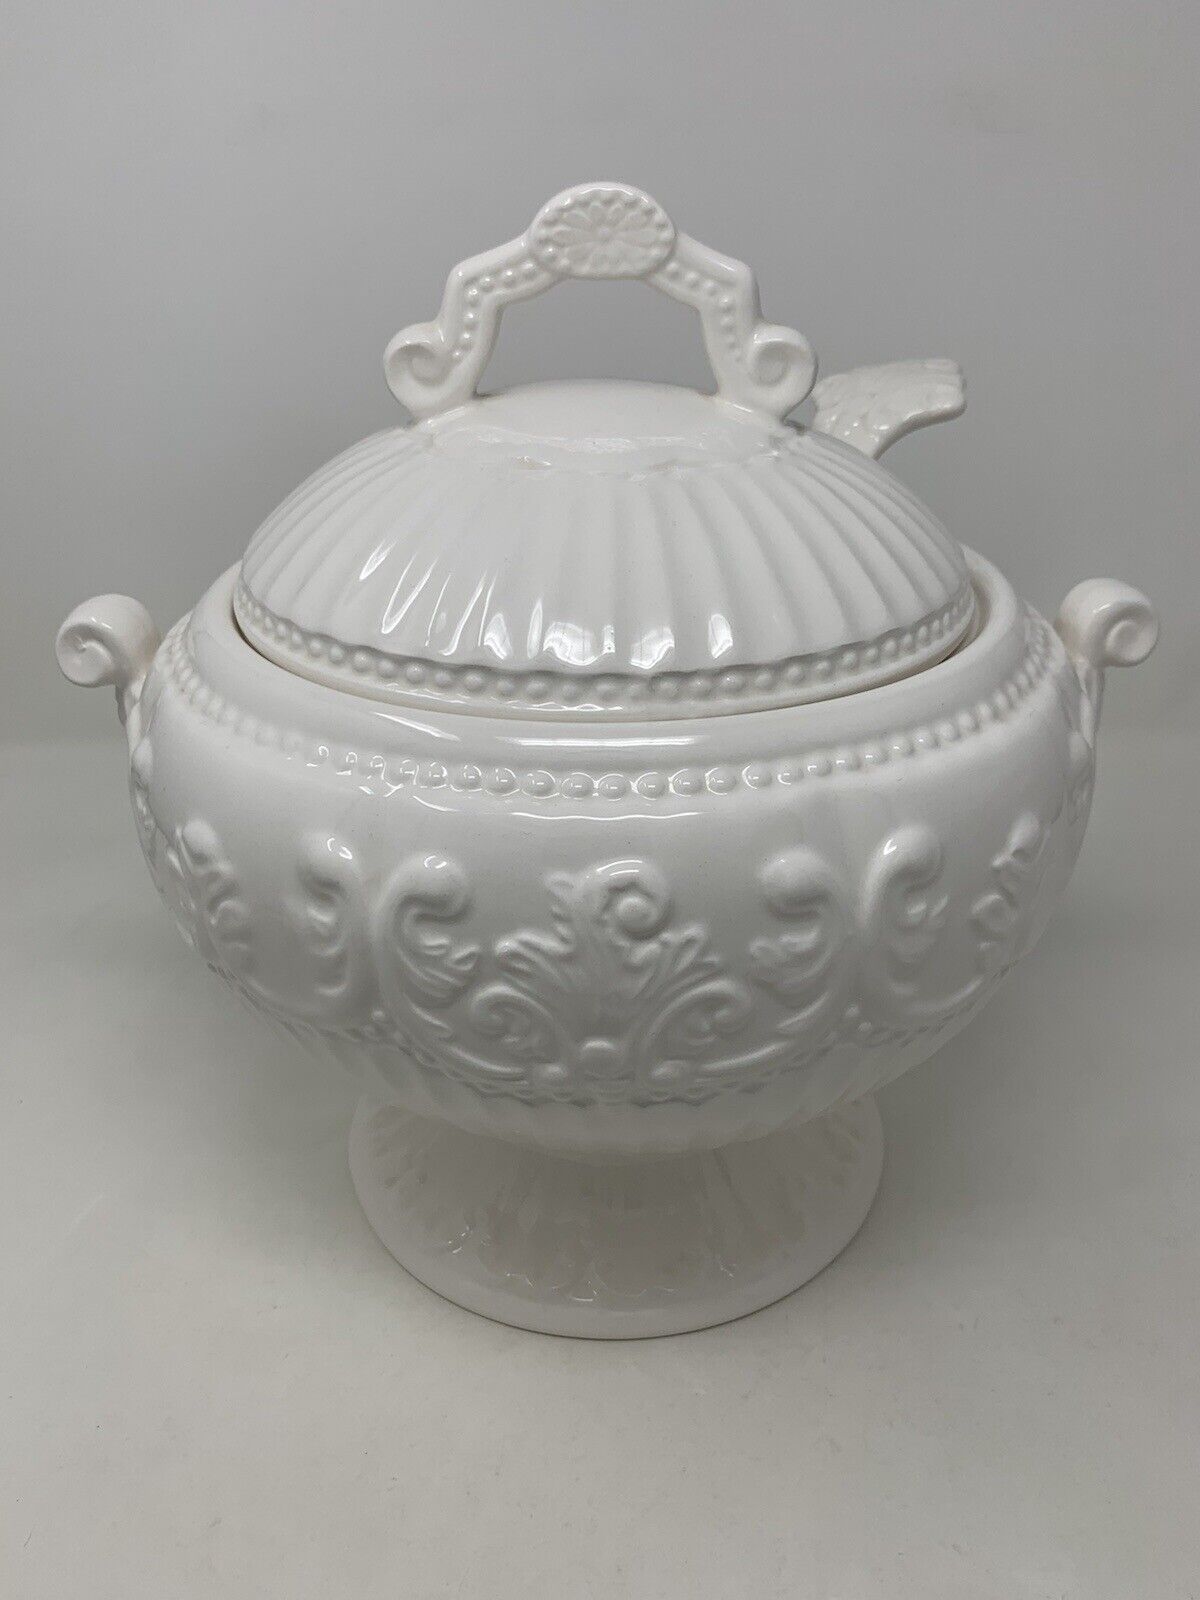 American Atelier Baroque White Soup Tureen Ironstone with Embossed Pattern 5599